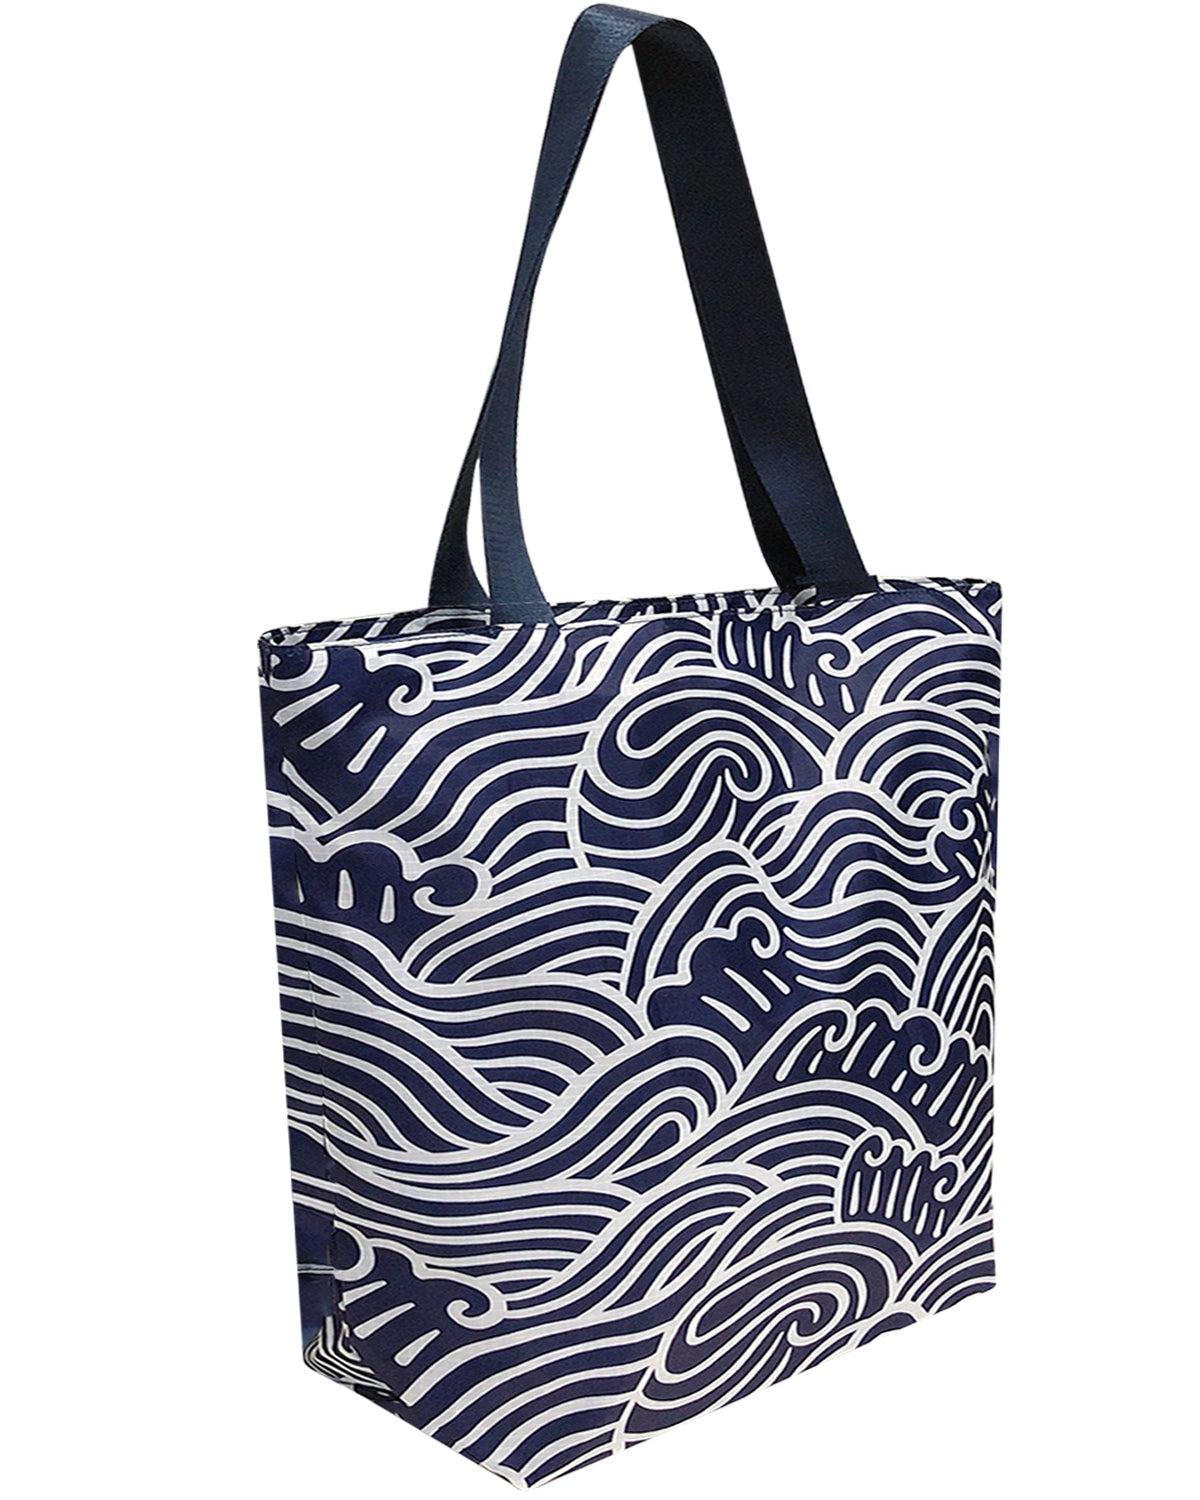 Wrapables Carryall Shopping Travel Tote Bag with Durable Ripstop Polyester - Foldable, Waterproof, and OEKO-TEX Certified